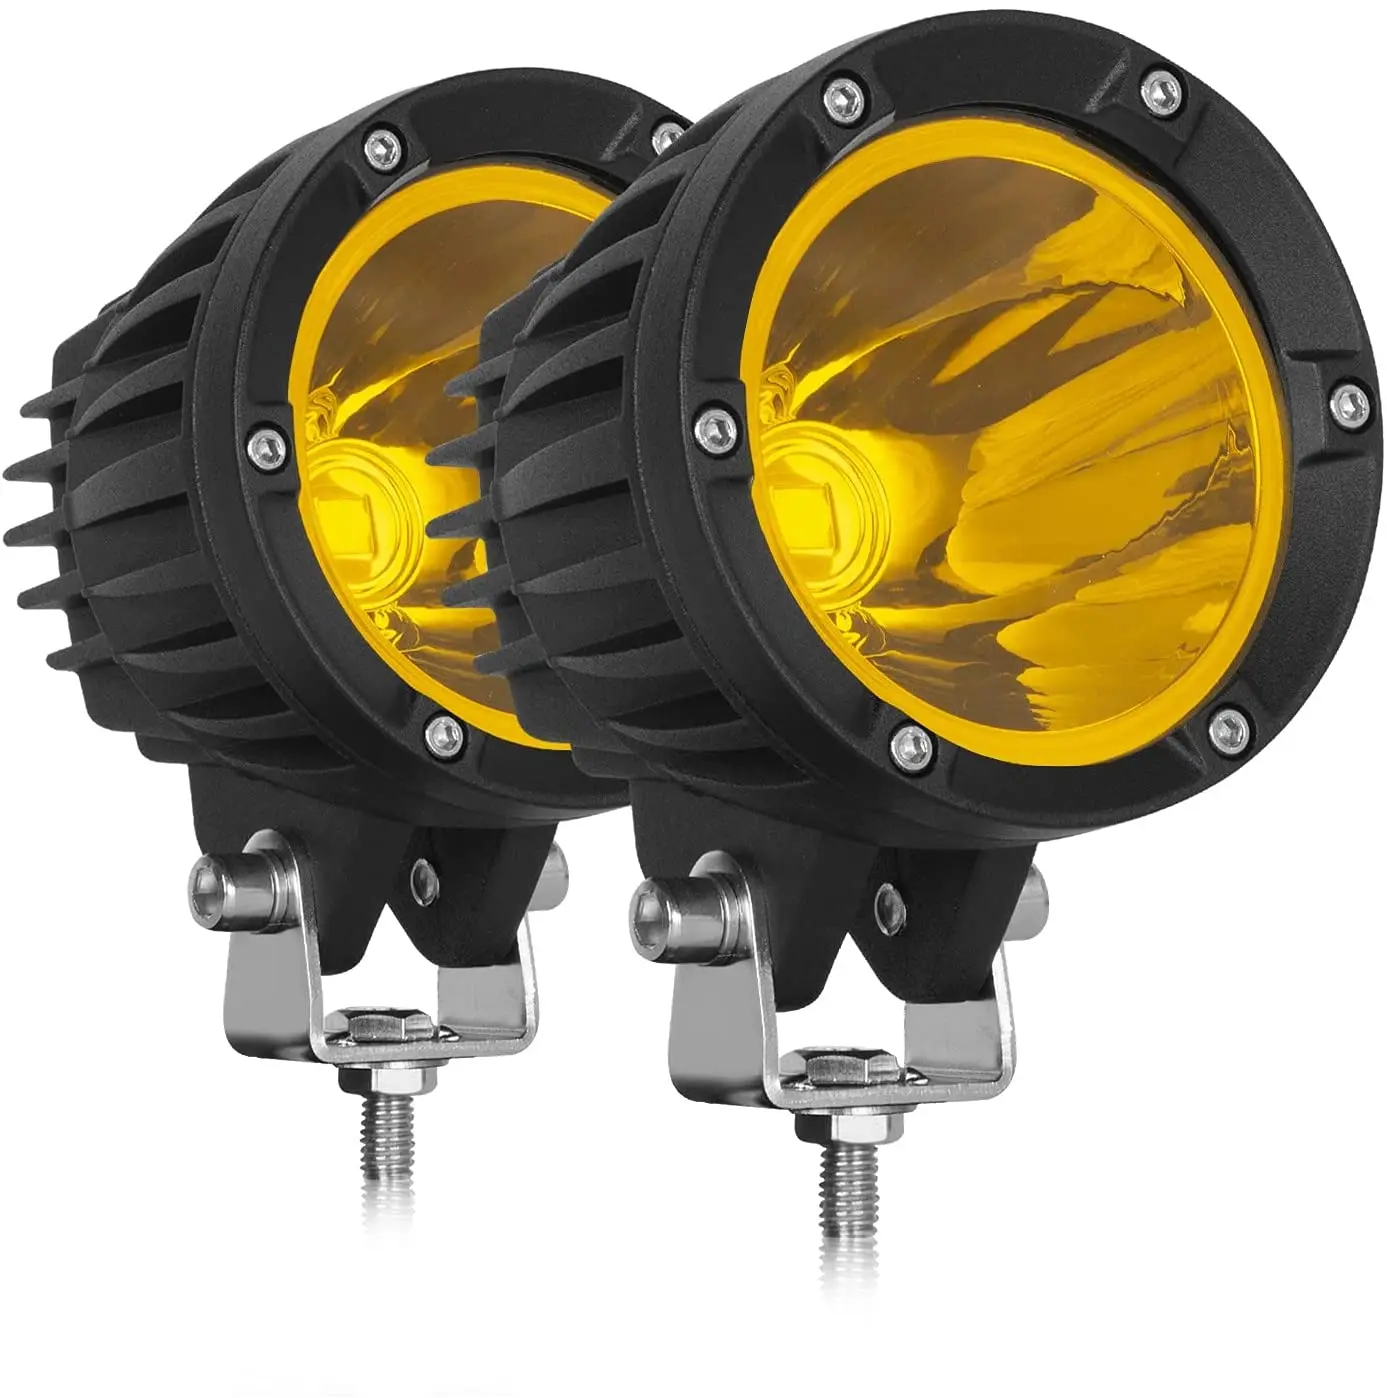 Yellow Spot Led Pods 4-inch 50W Round Work Driving Off-road Fog Cube Light Bar  for Motorcycle UTV Truck Boat SUV Tractor ATV